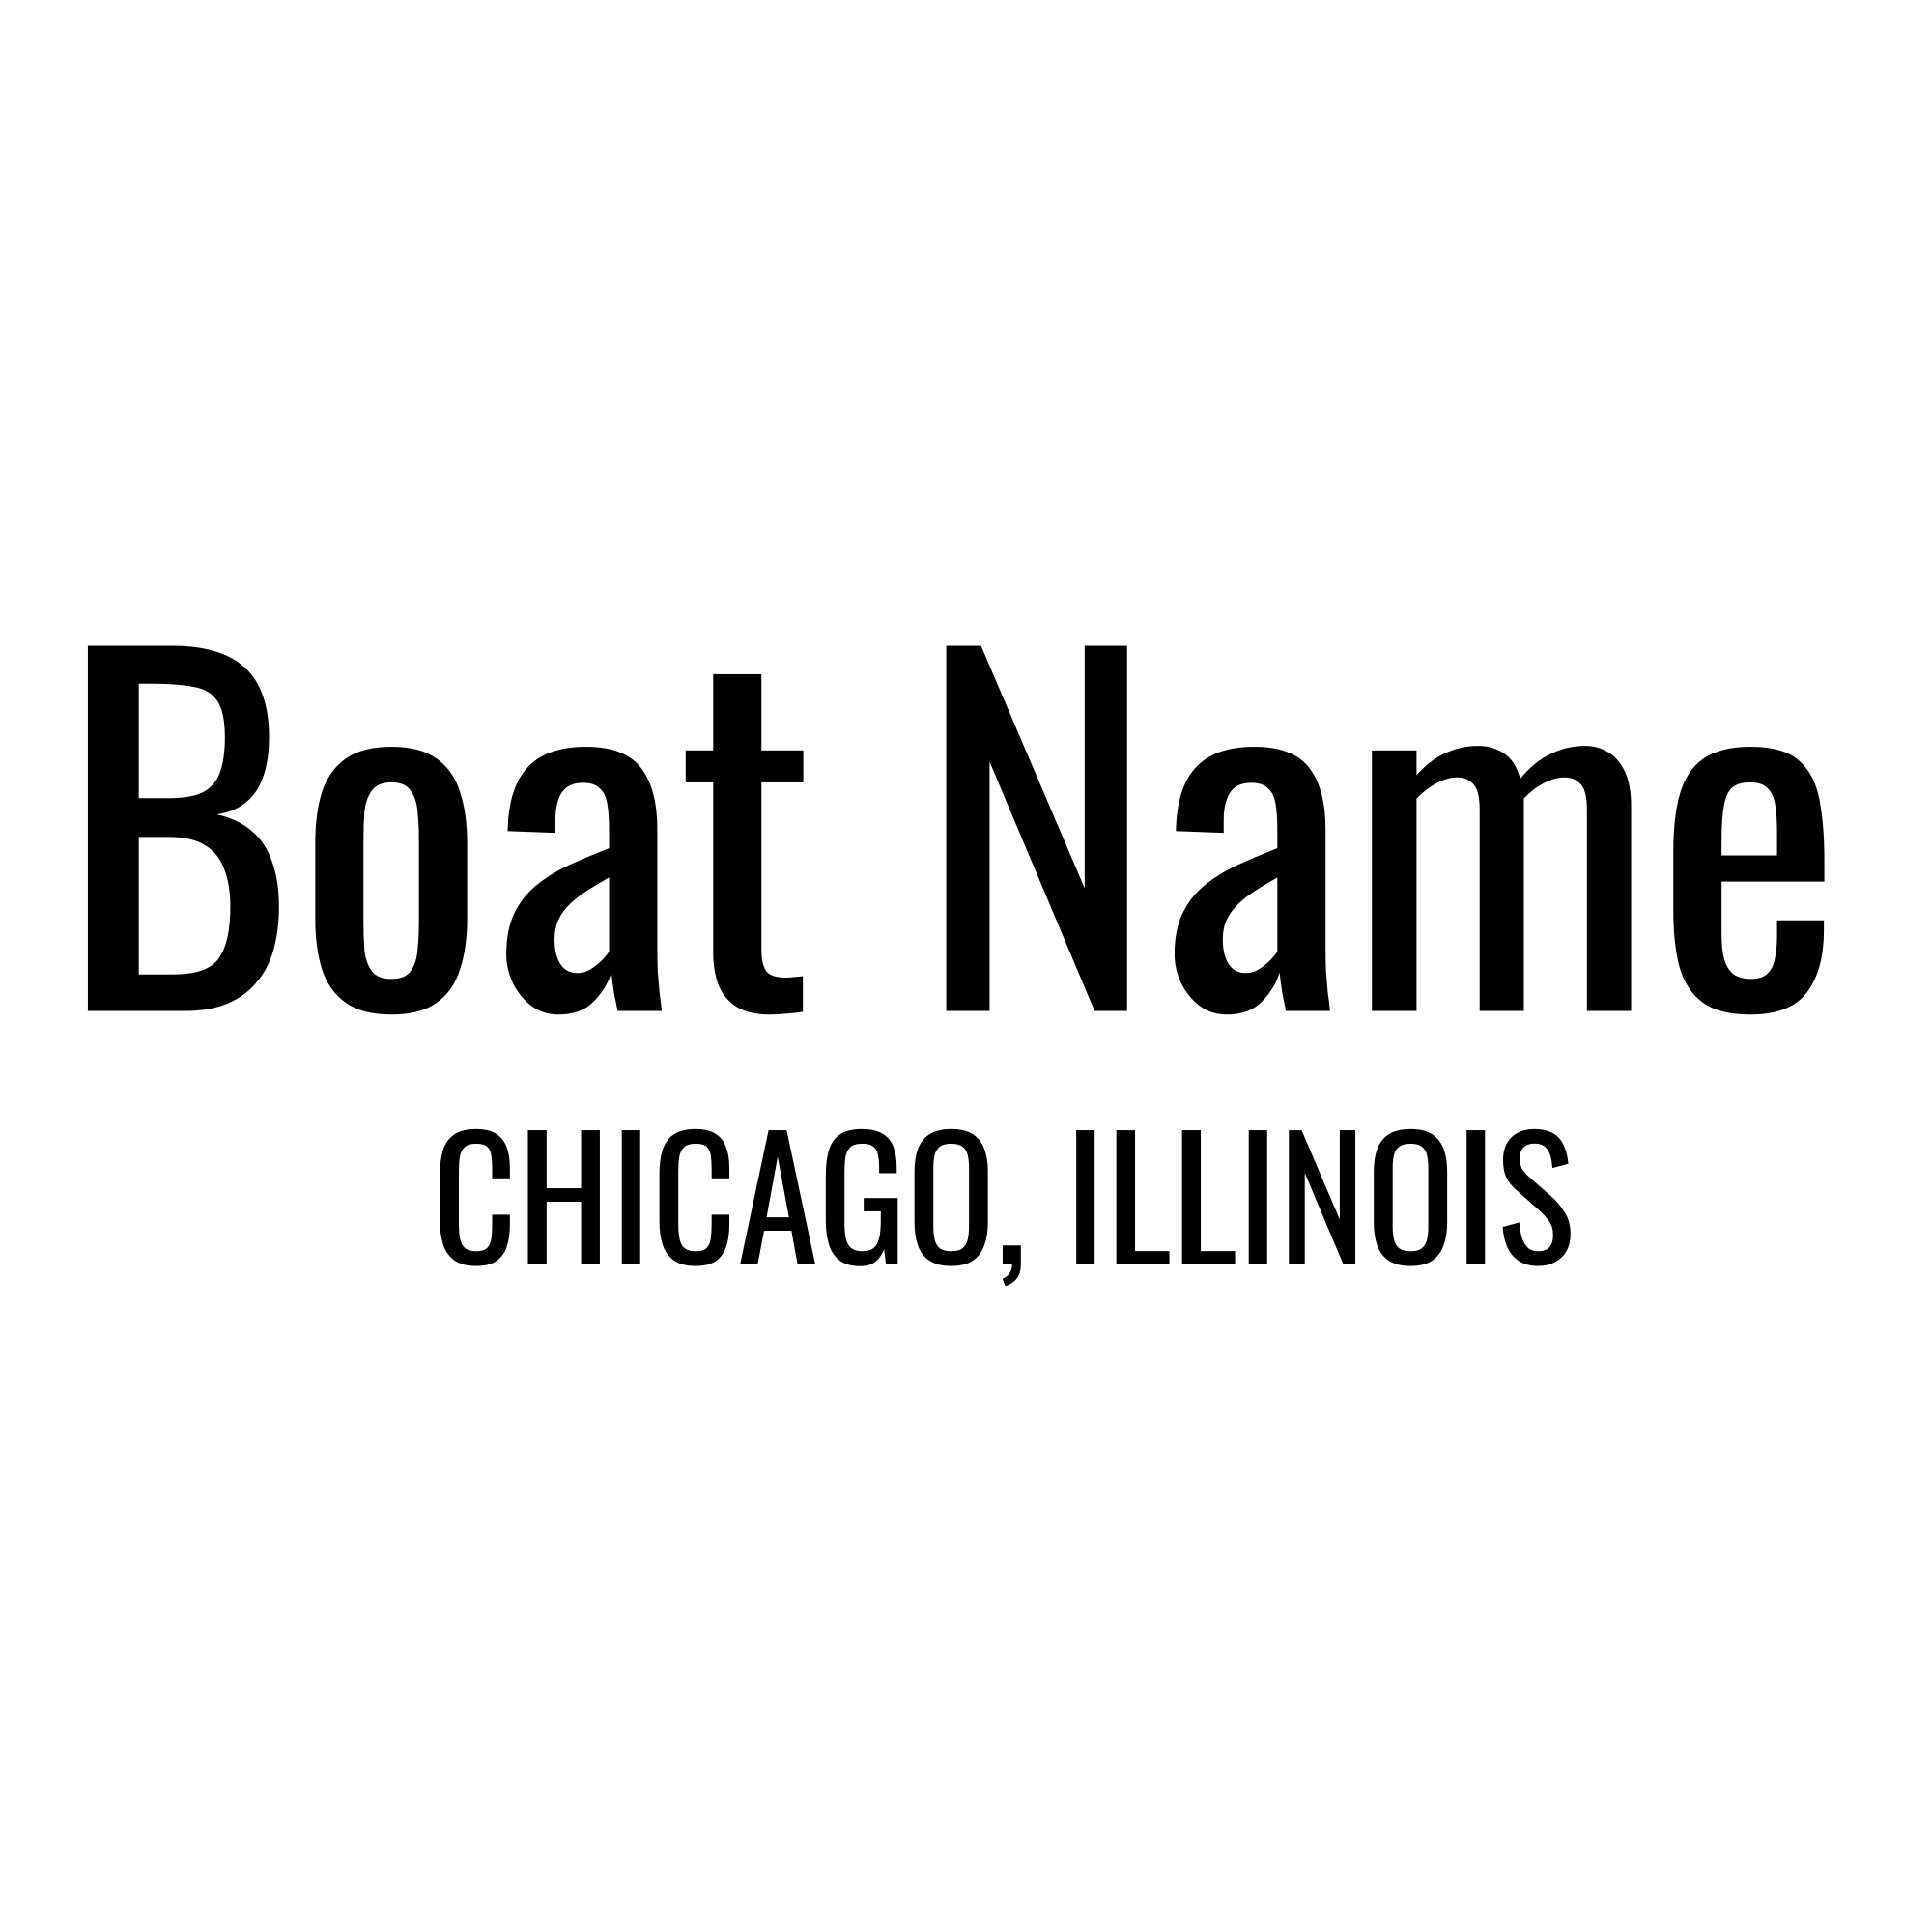 Personalized Boat Name Vinyl Decal with Hailing Port State - Permanent Marine-Grade for Signs, Speed boat, Fishing Vessel, Watercraft B1, B1